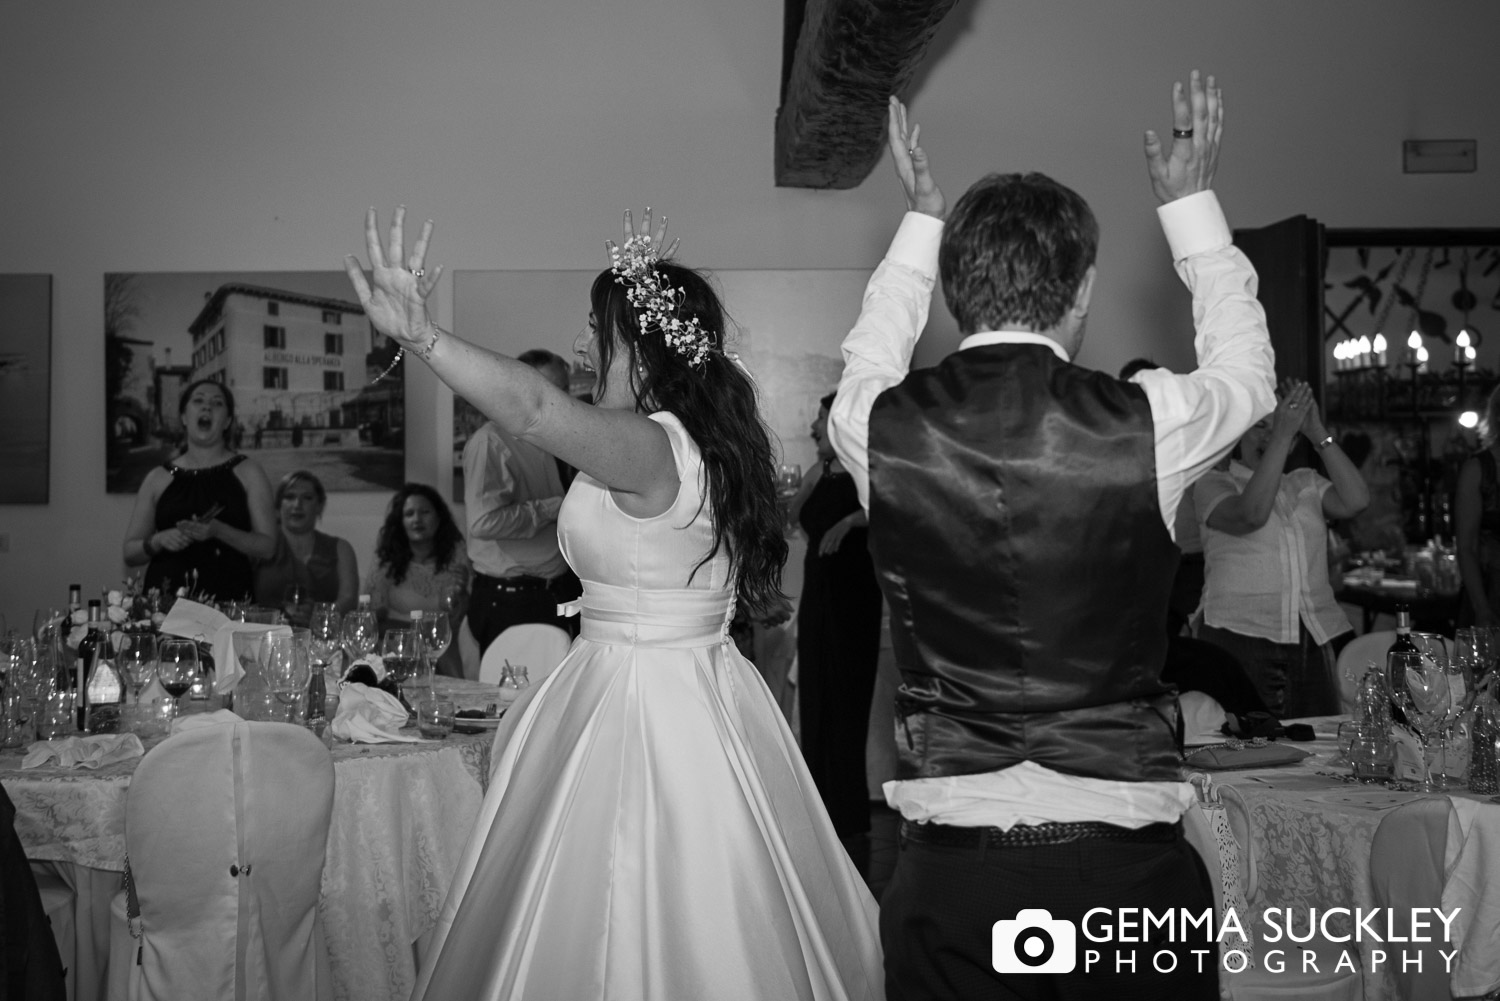 Yorkshire bride and groom dancing at their wedding